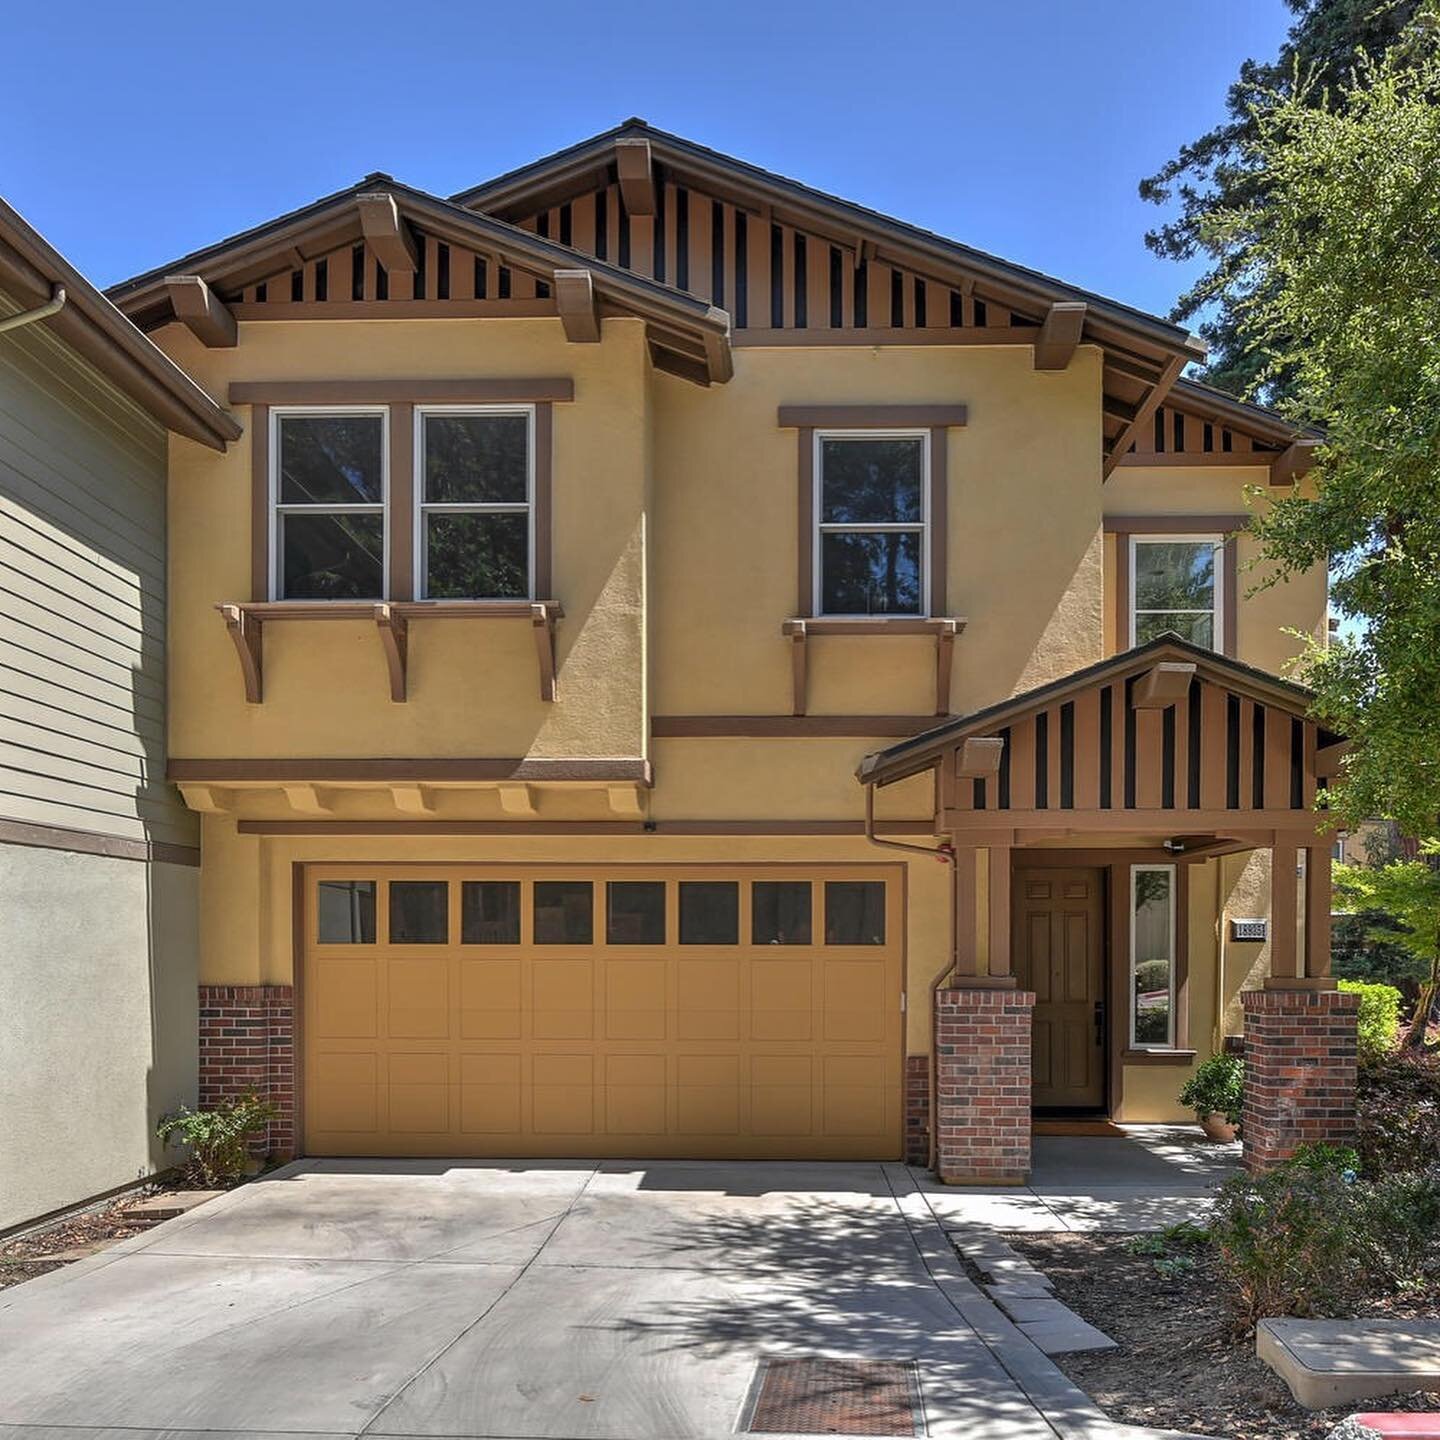 Open House:
3 🛏 | 2.5 🛁 | 2 🏎 
2,441 sq/ft
18935 Brookside, Saratoga
-
Attached Single Family #Home Close Walking Distance To #Downtown #Saratoga! Built in 2012, This Gorgeous Property Is Hidden Amongst Redwood Trees and Nestled In Quiet Serene Ne